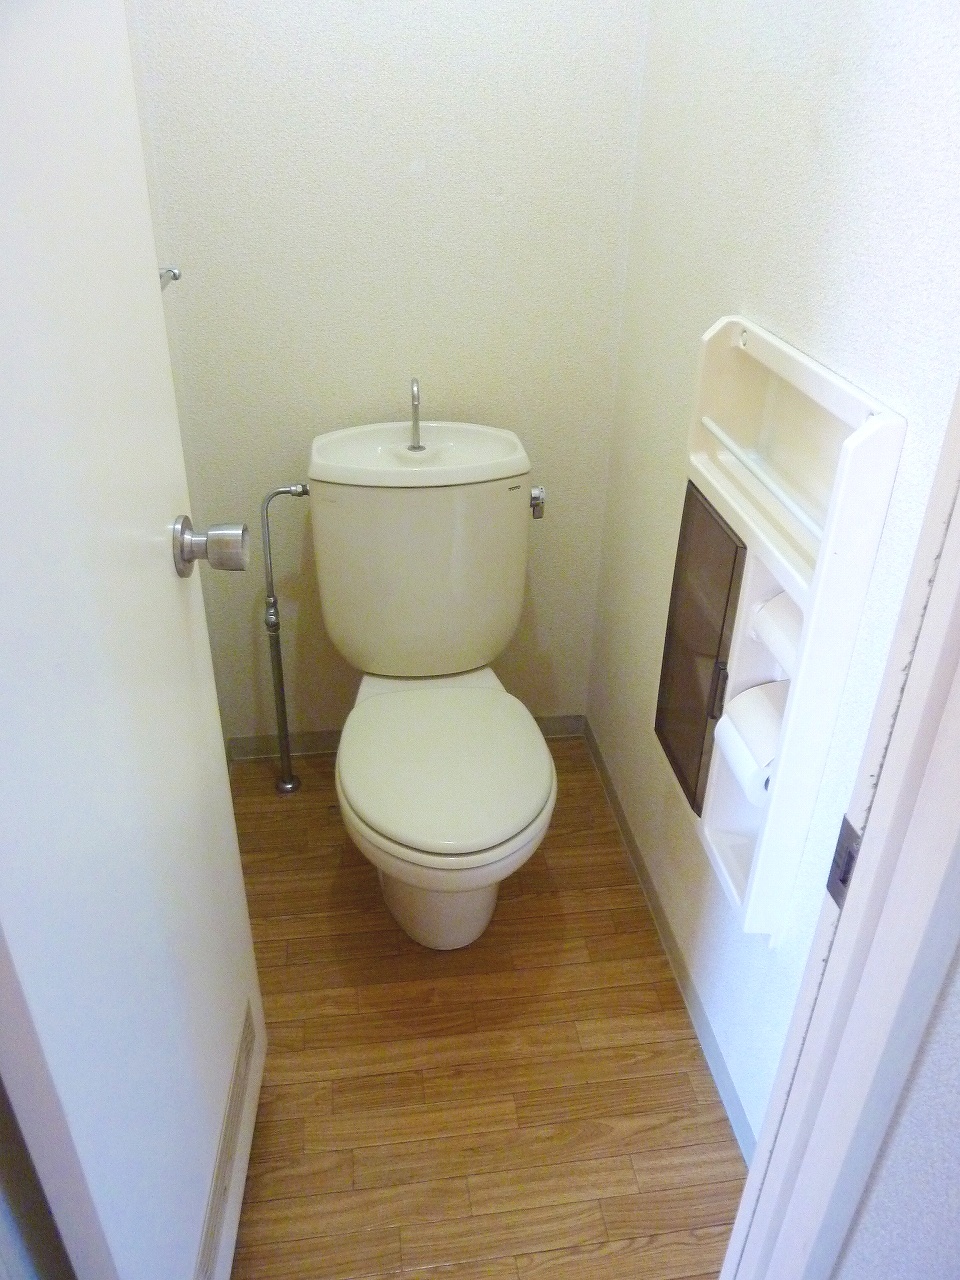 Toilet. It will be housed with a Western-style flush toilet